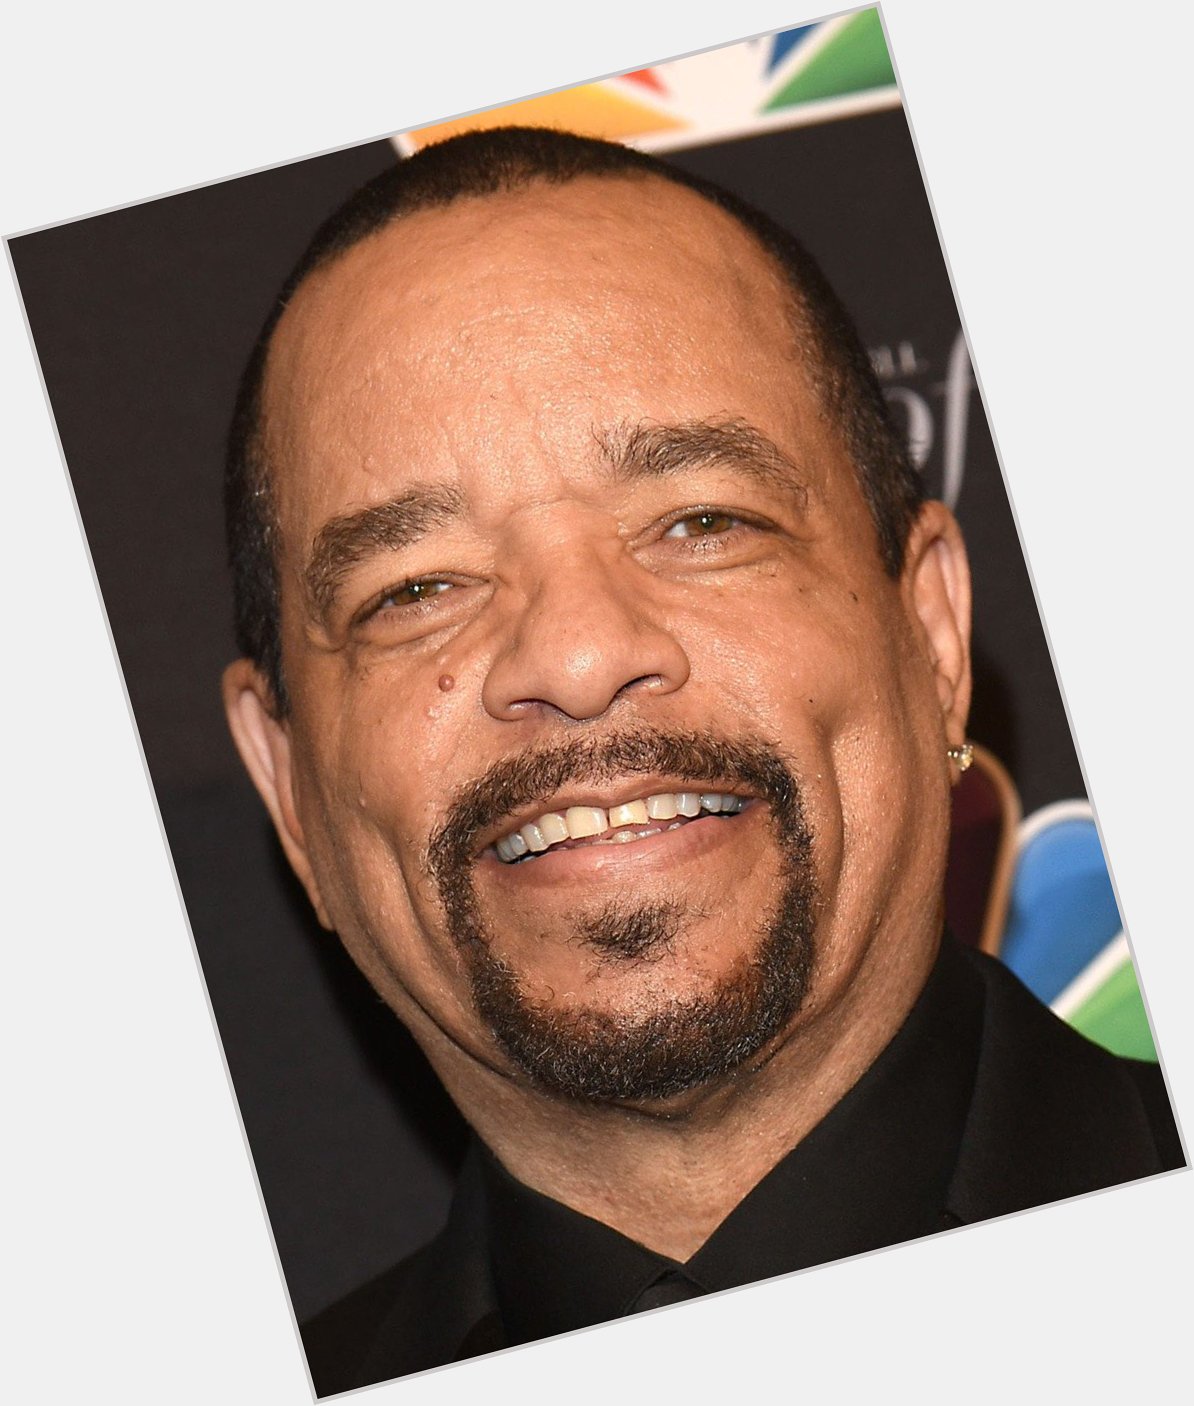 Wishing a Happy 63rd Birthday to rapper Ice T!        